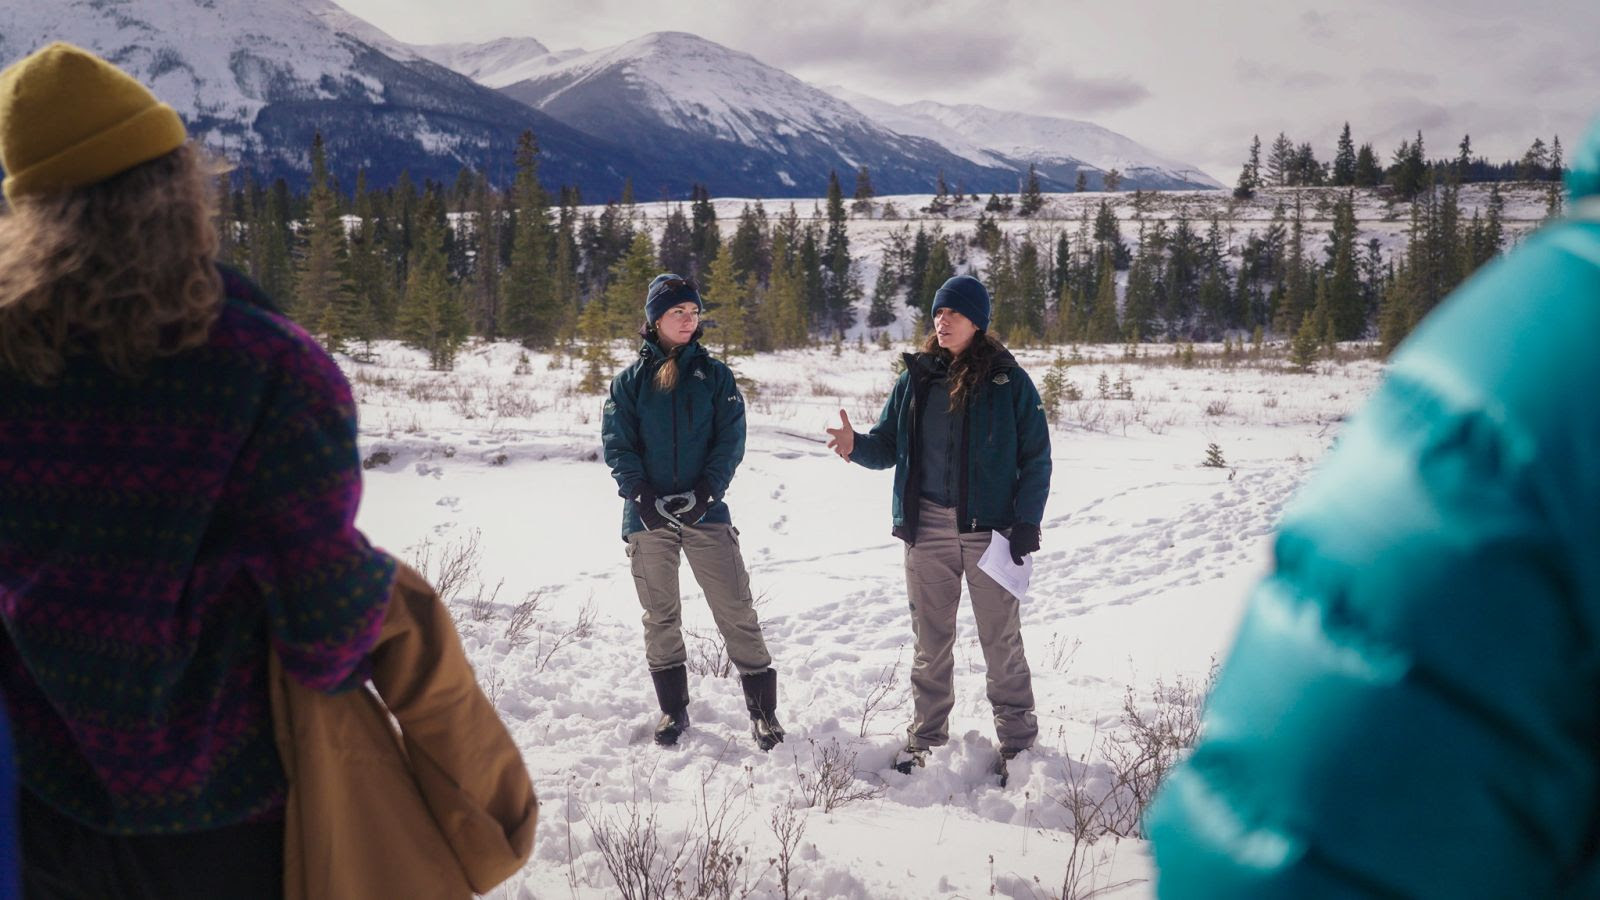 Two Parks Canada biologists are shown standing outside in the snow, with snowy mountains in the background, while presenting to a group of people.